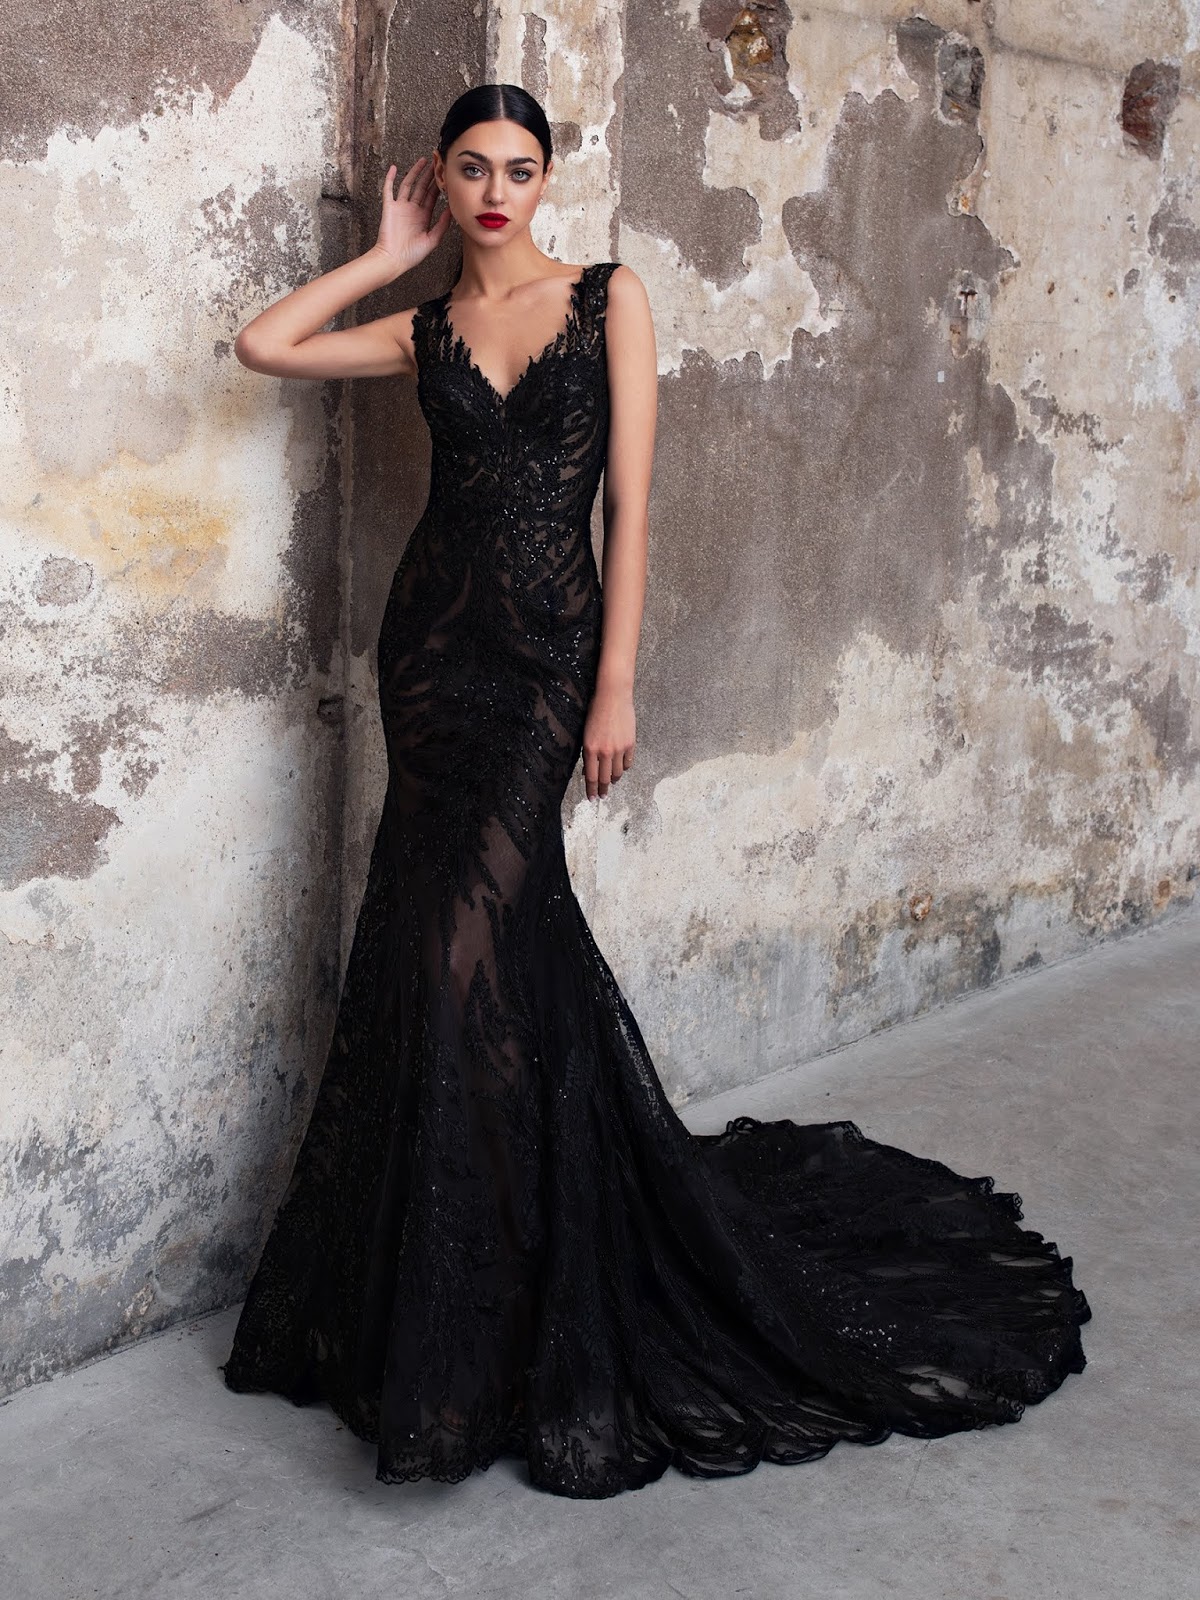 Wedding Dresses With Black Lace of the decade Learn more here ...